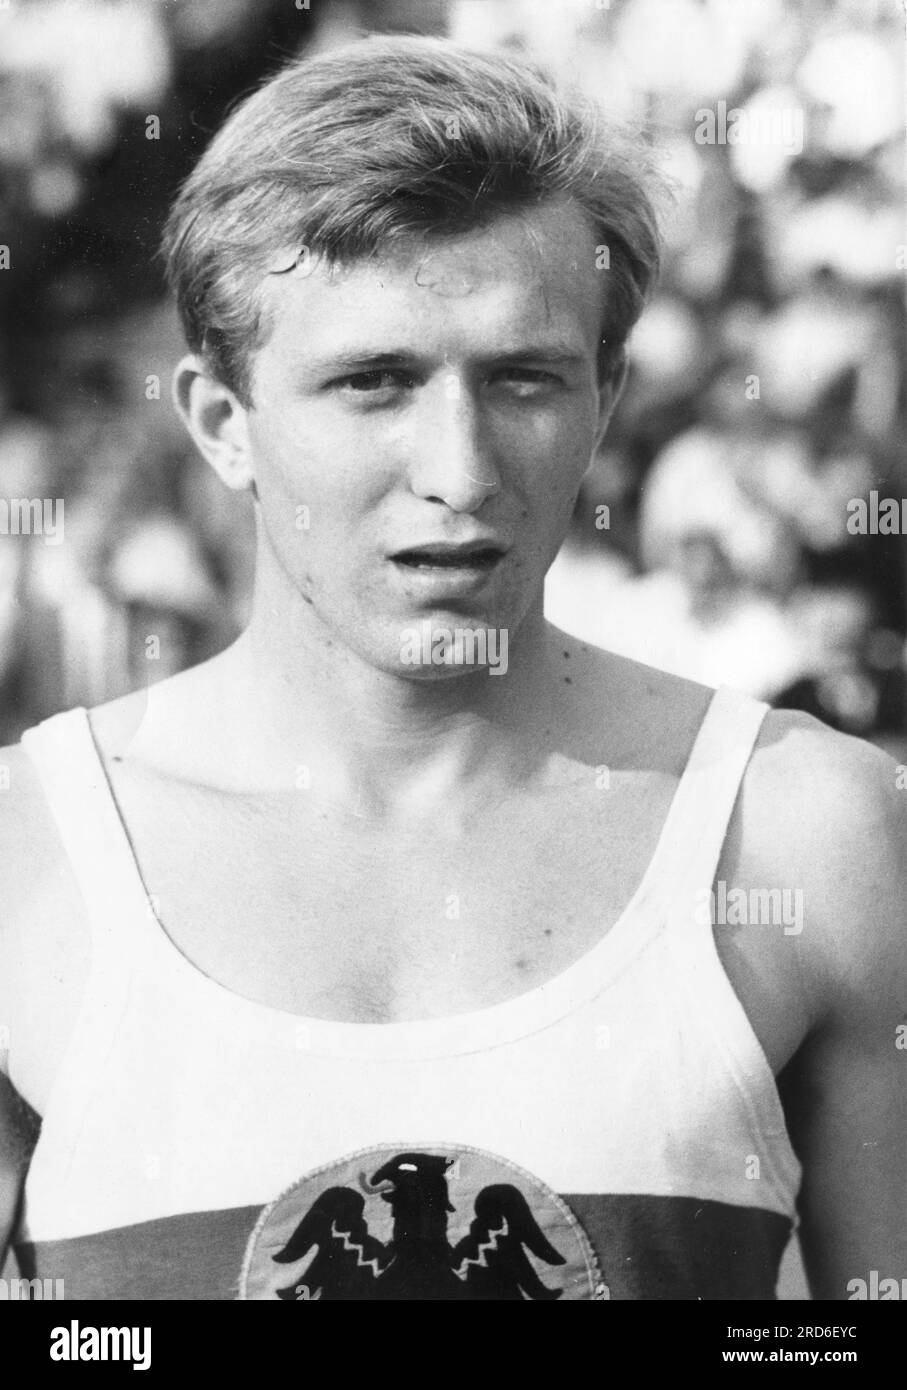 Wucherer, Gerhard, * 11.2.1948, German athlete, 1969, ADDITIONAL-RIGHTS-CLEARANCE-INFO-NOT-AVAILABLE Stock Photo